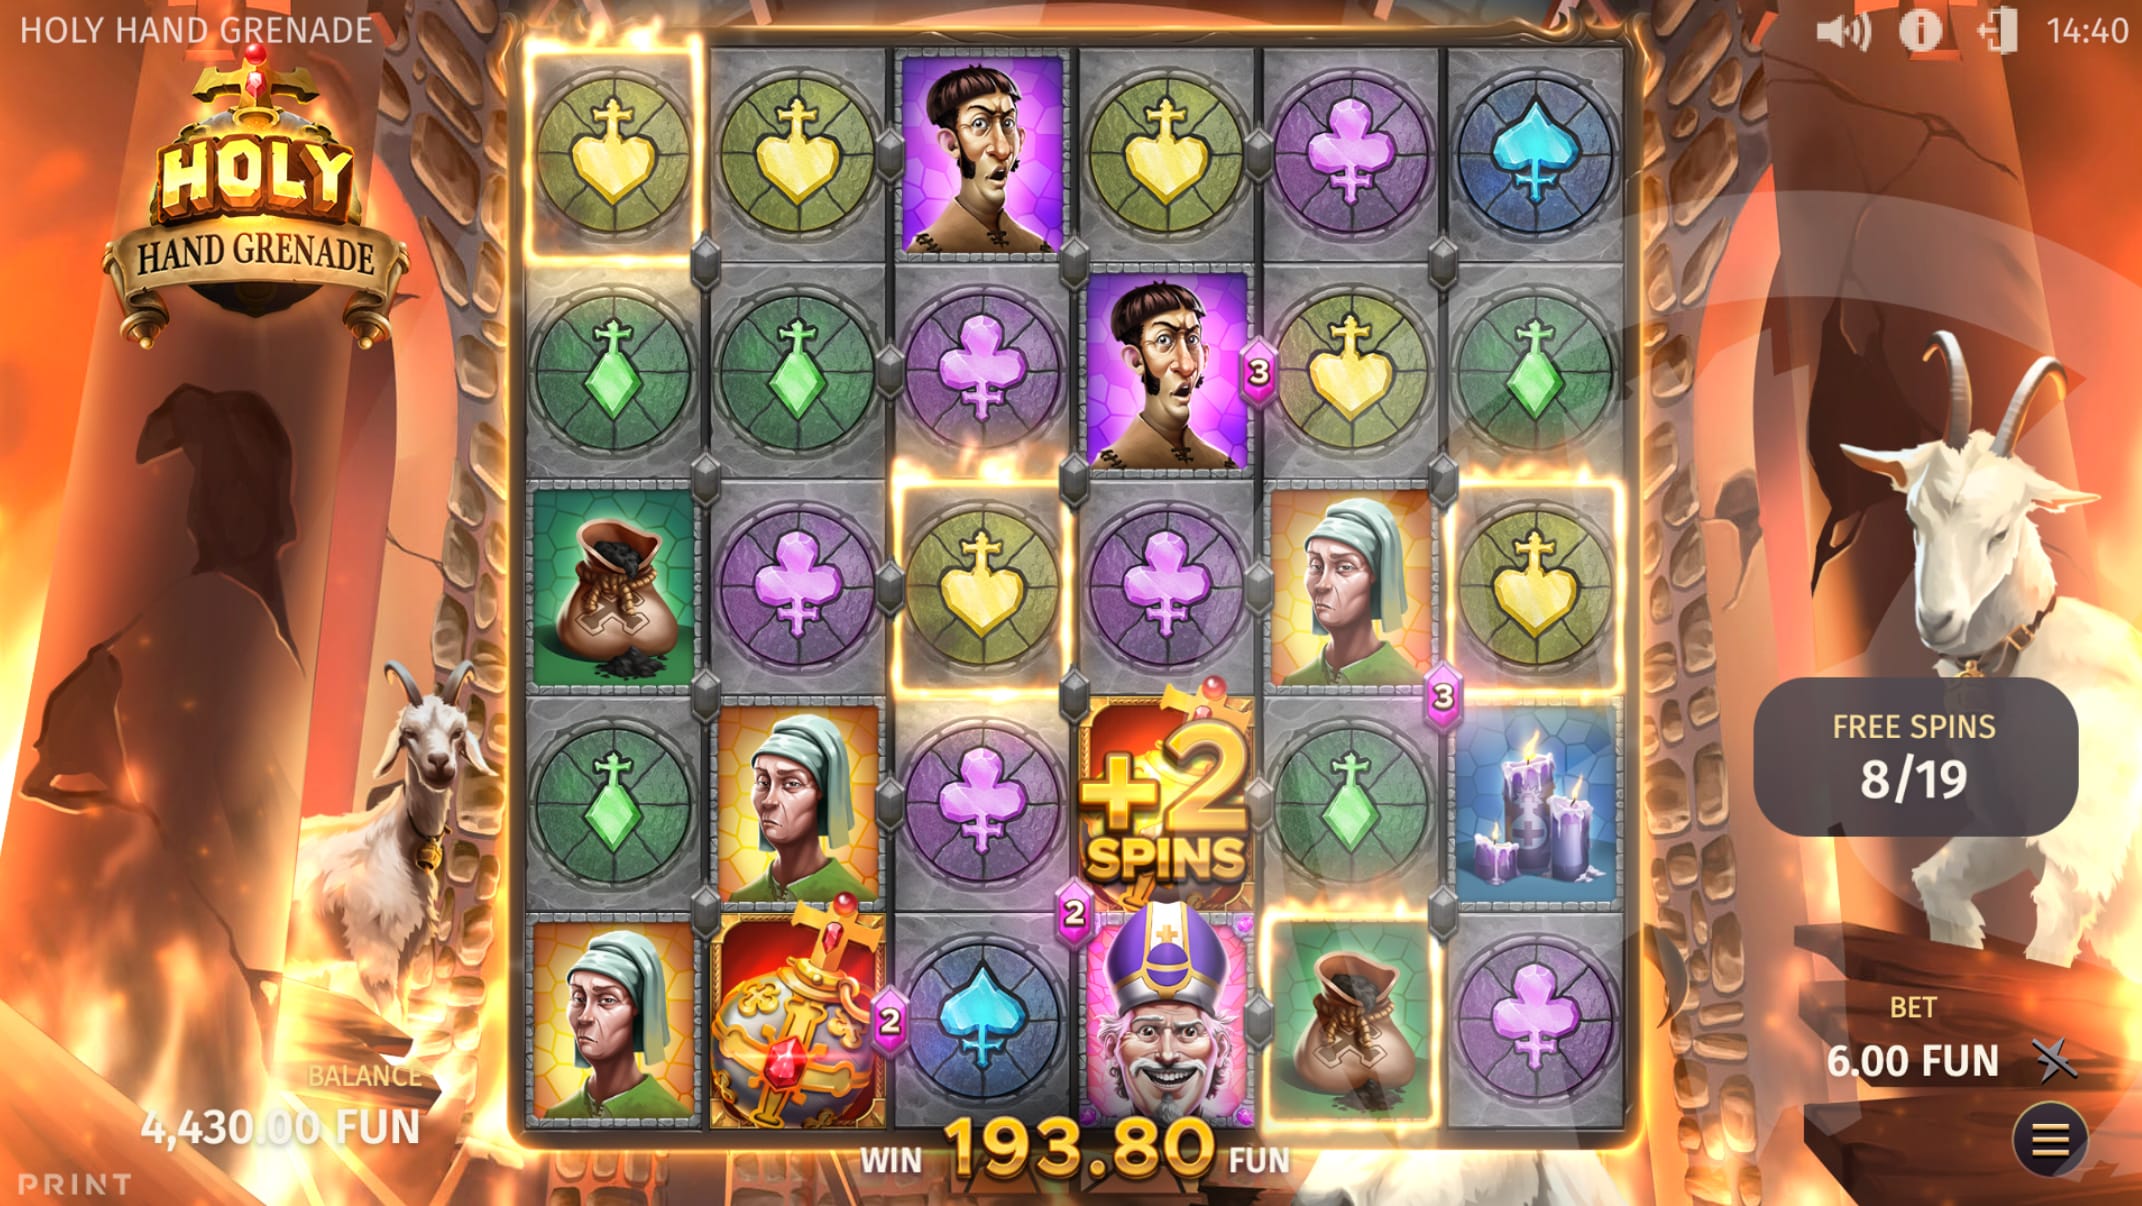 Land Holy Hand Grenades During Free Spins to Trigger Additional Spins and Create Sticky Frames